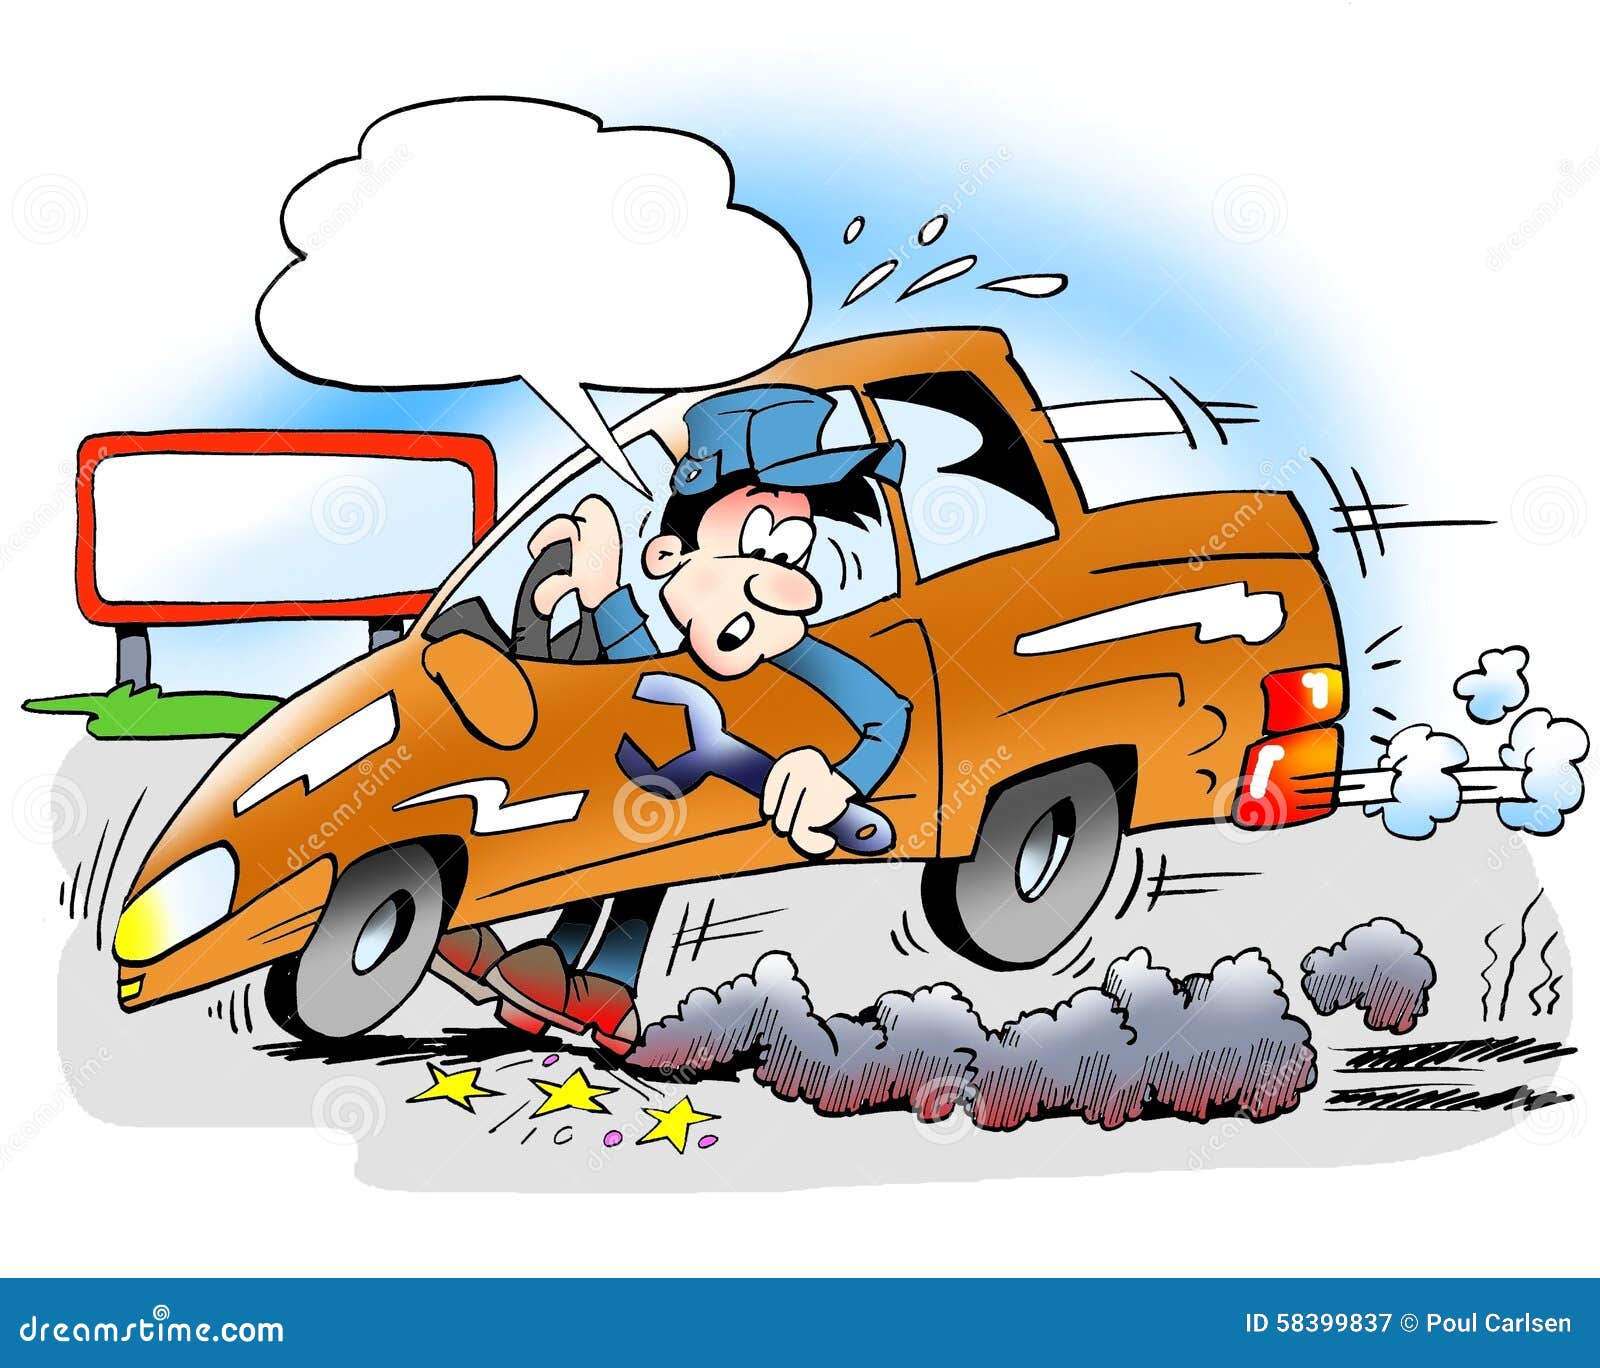 clipart of car brakes - photo #40